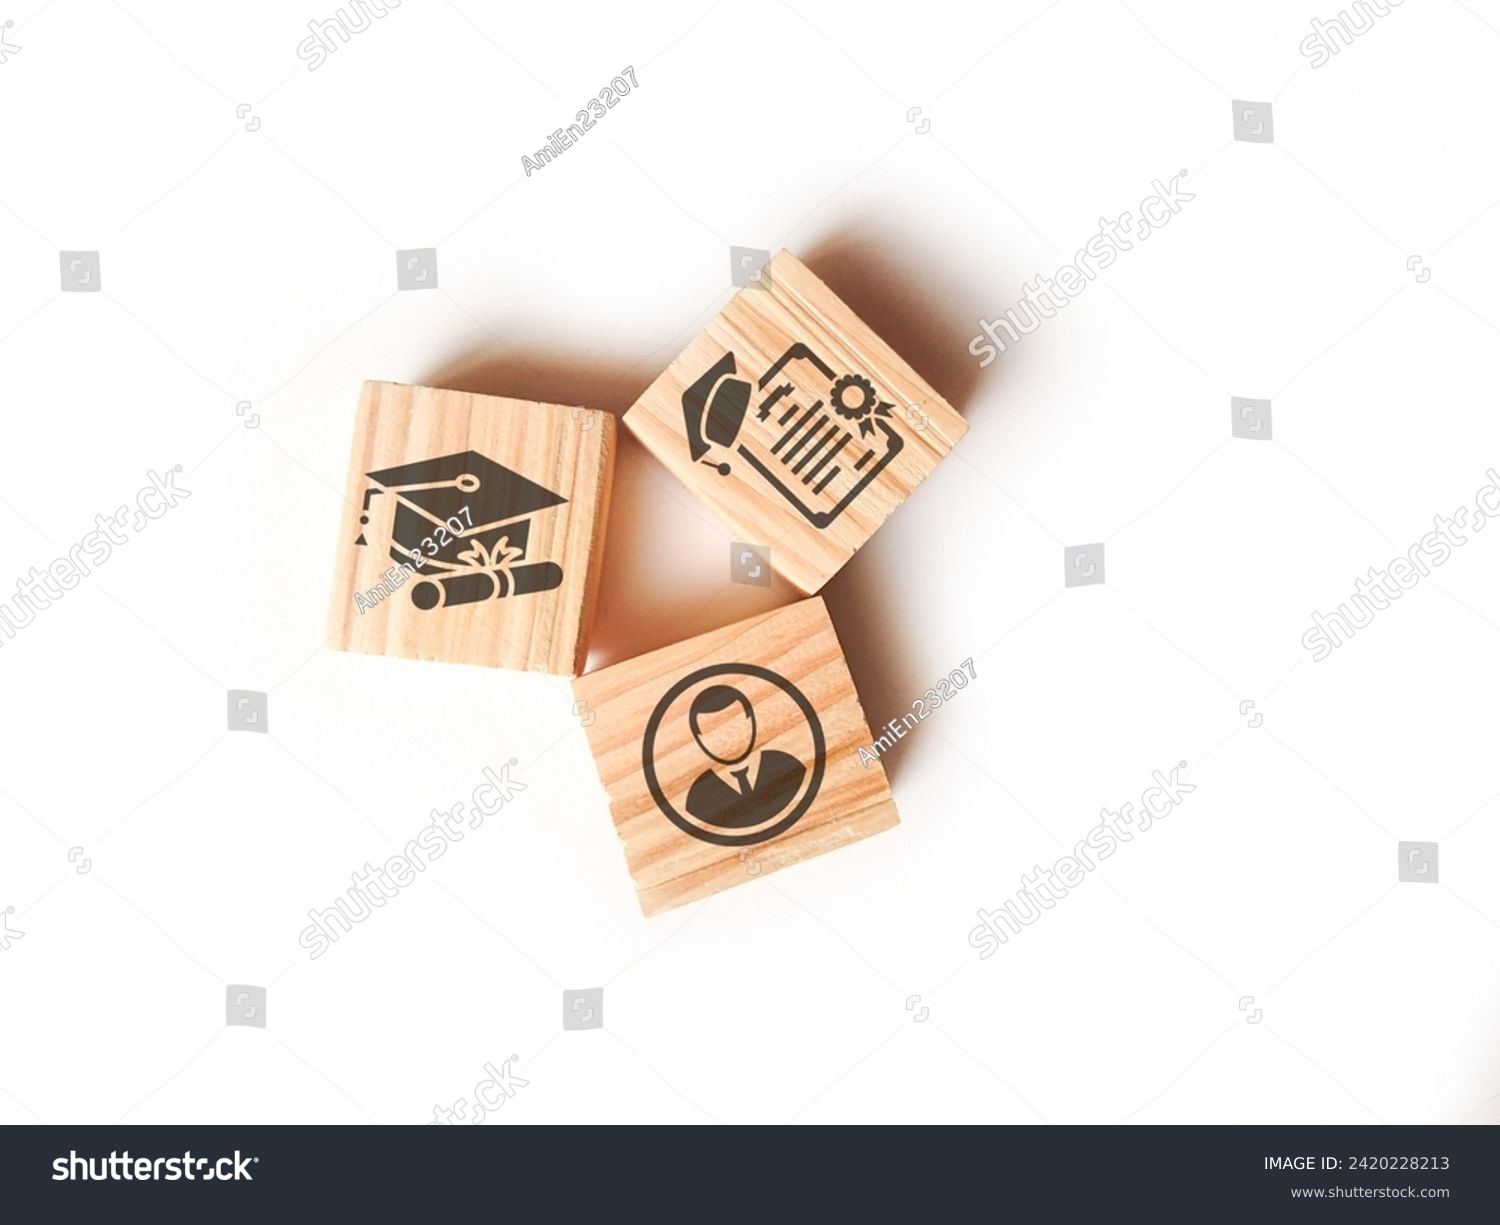 Wooden blocks with qualifications, certificates and graduate icons. The concept of academic qualifications. The concept of required skills. #2420228213